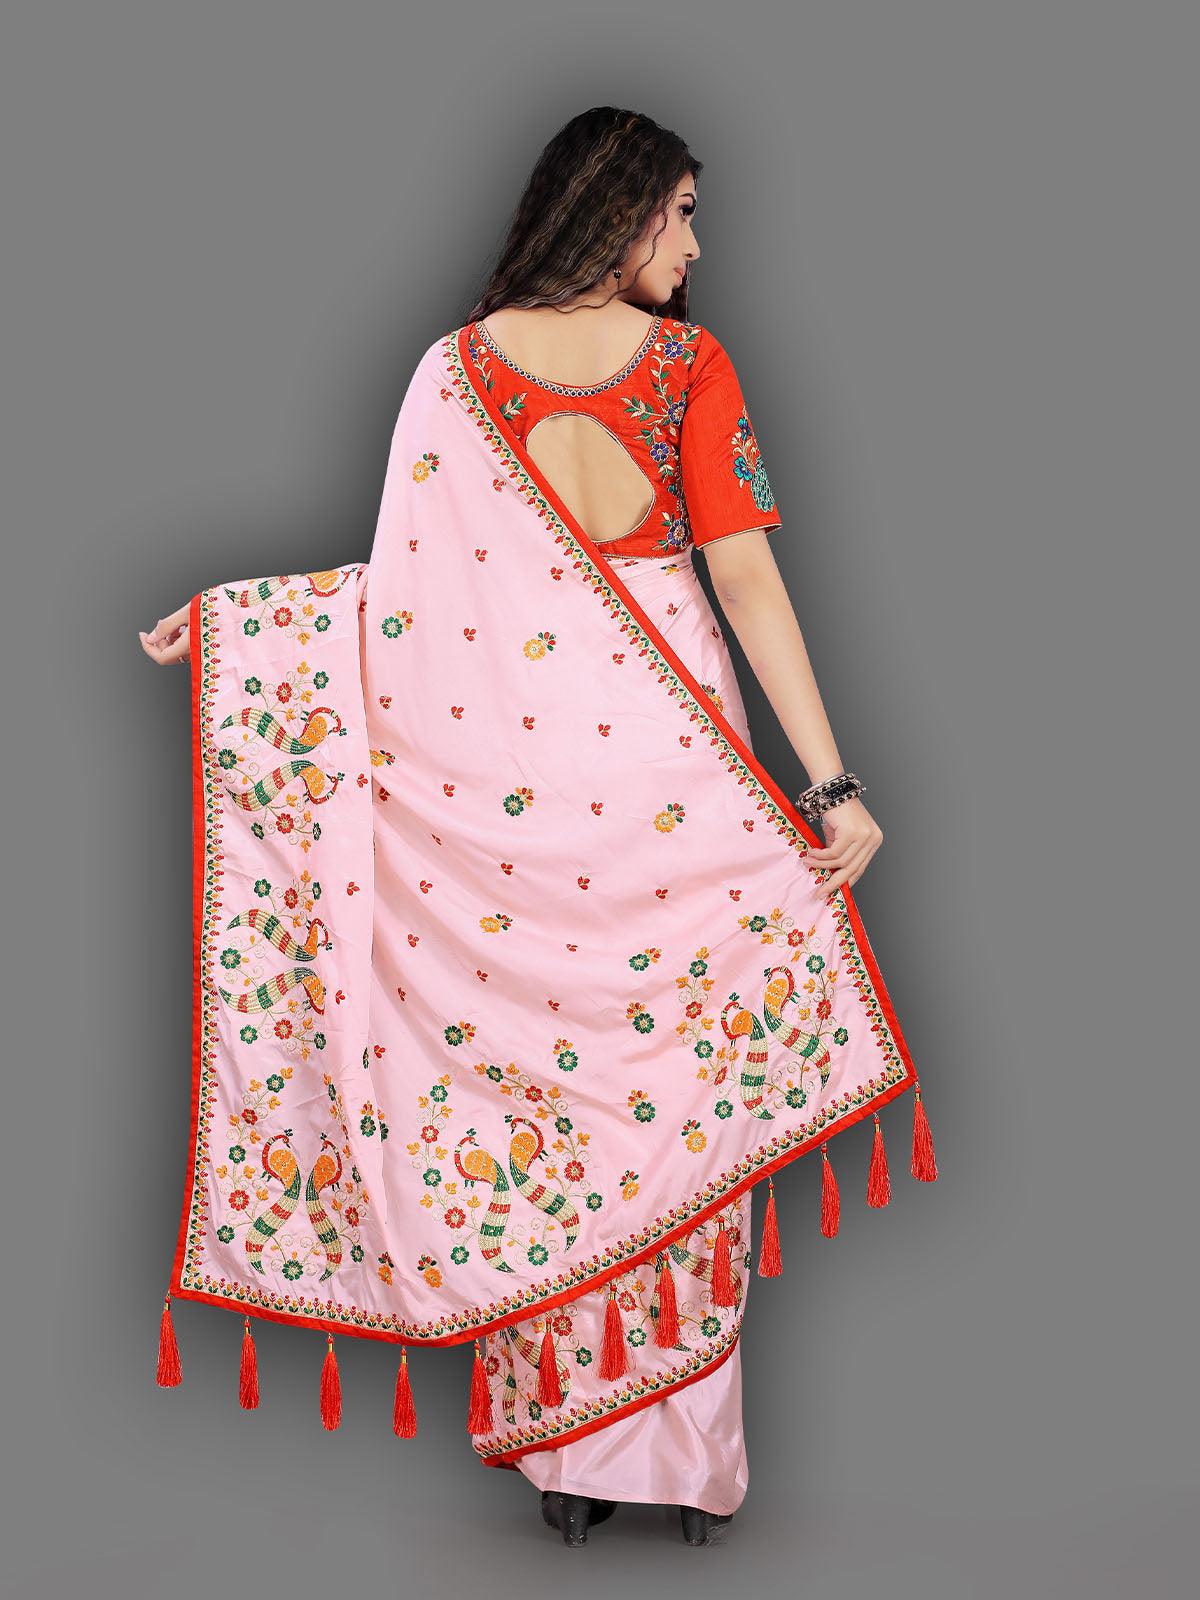 Women's Pink Crepe Silk Heavy Embroidery Saree - Odette